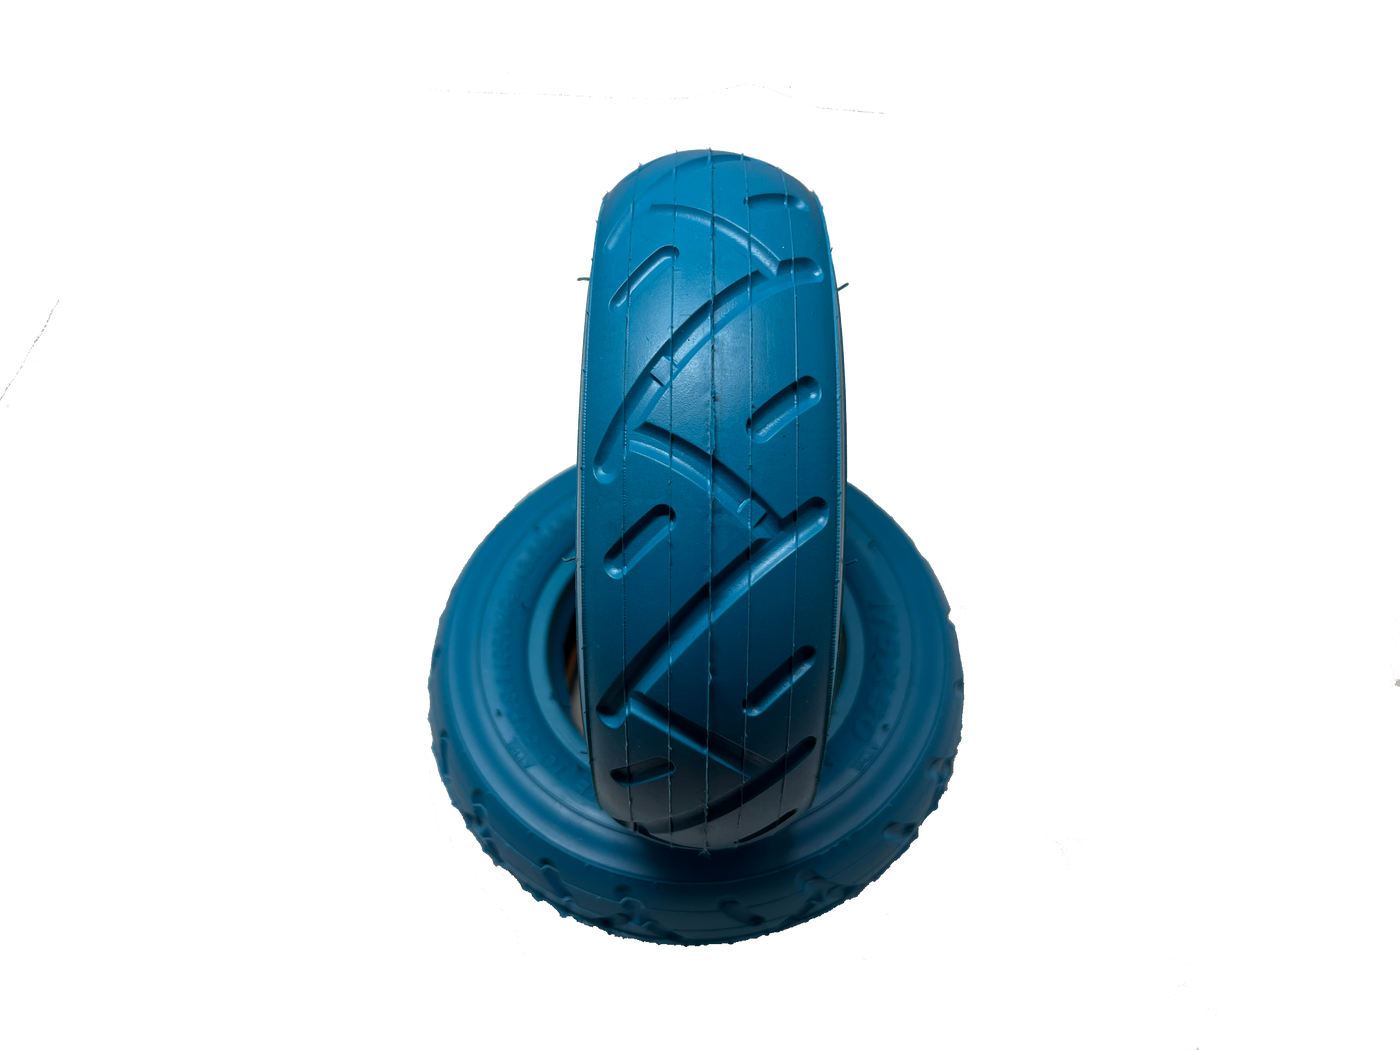 All Terrain Tire SURGE 175mm - 7 inch for Evolve Hadean All Terrain, GTR2 All Terrain, and GTR2 All Terrain